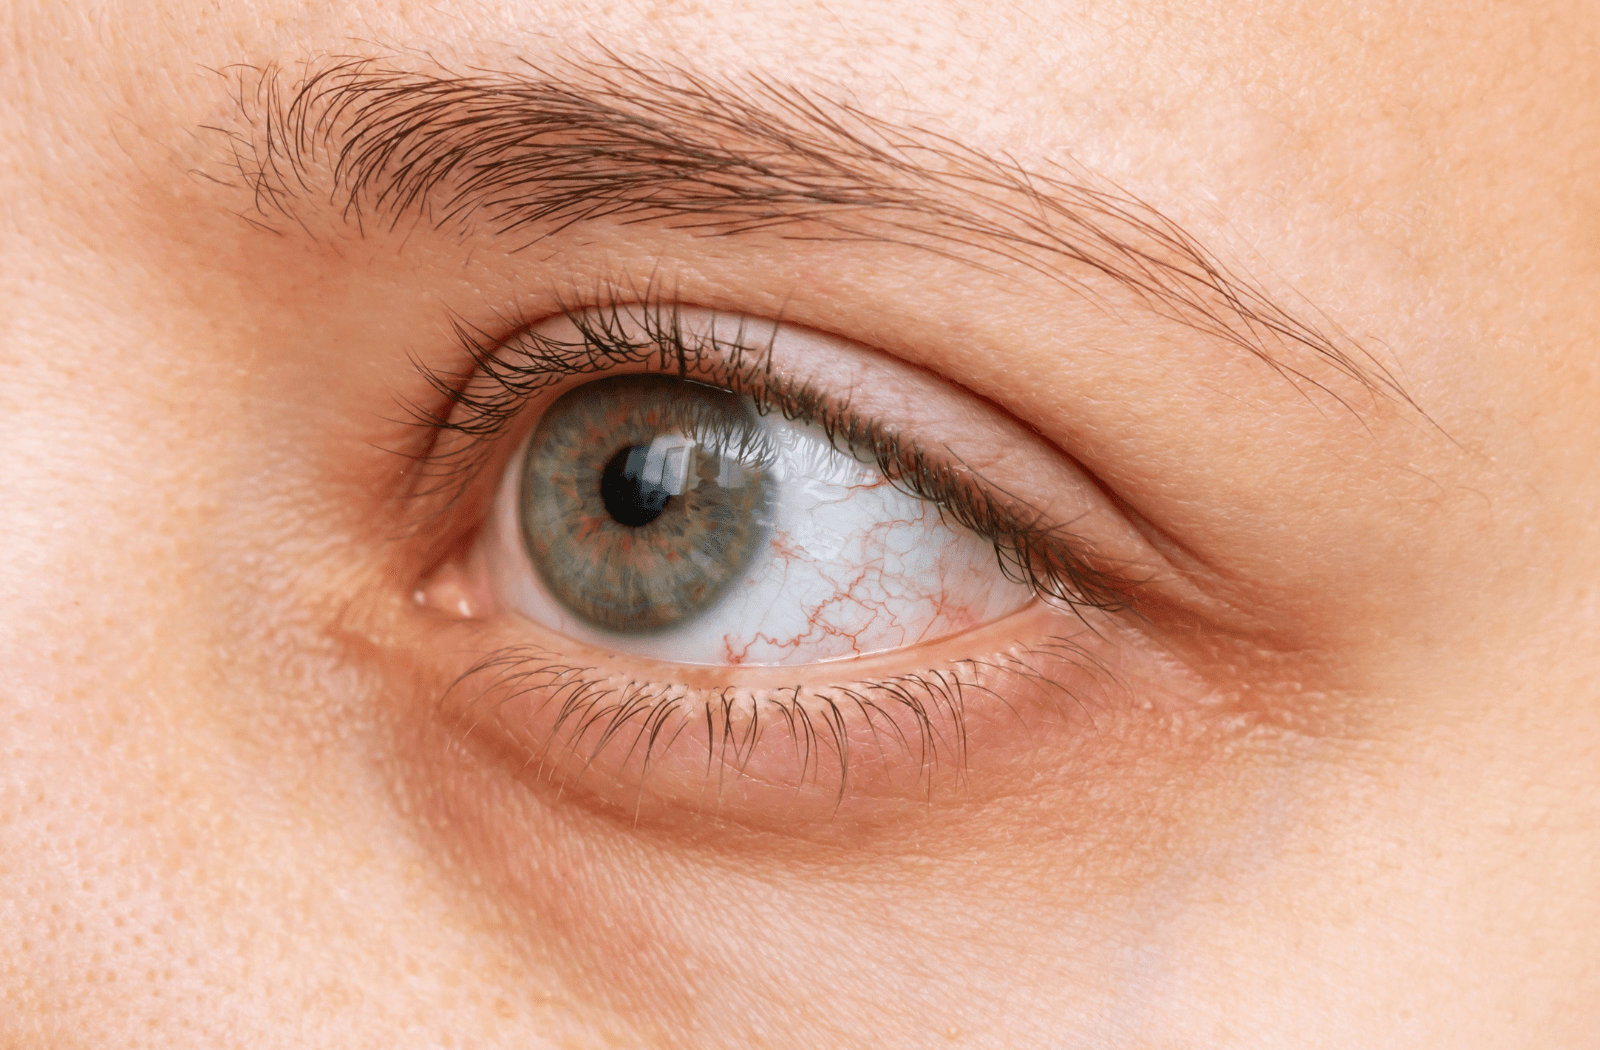 A close up image of a woman's dry eye